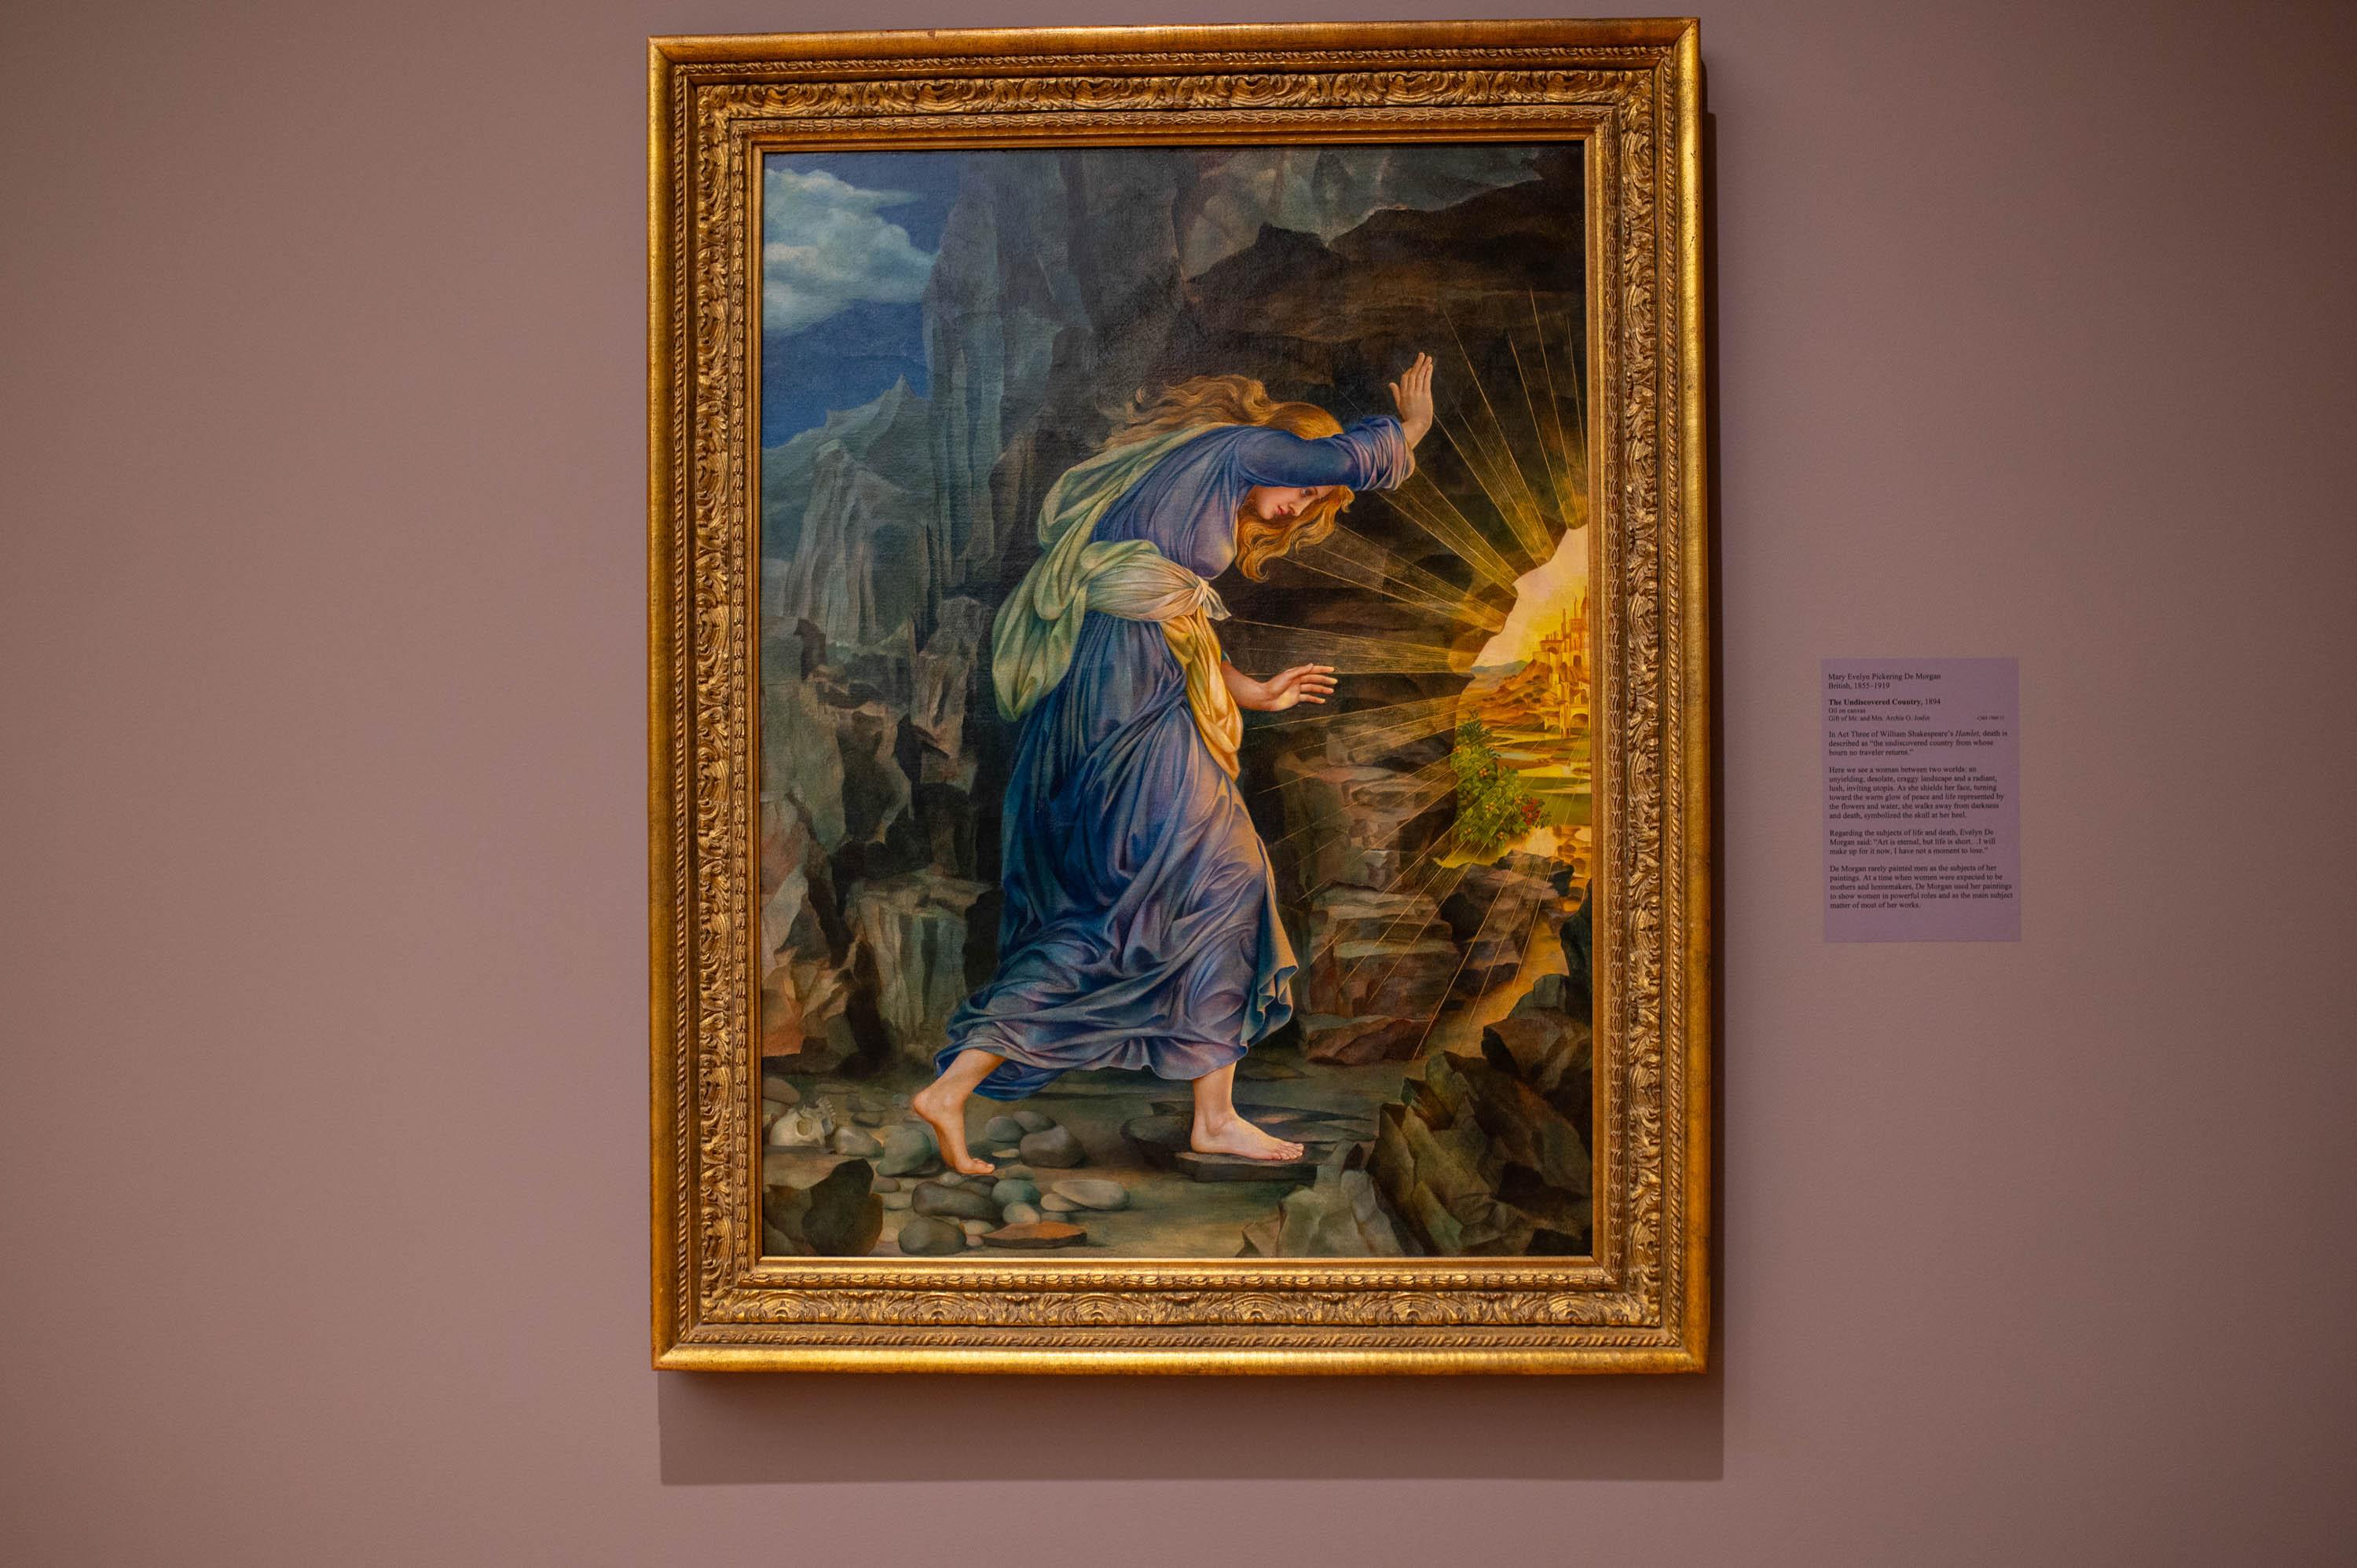 Mary Evelyn Pickering De Morgan's The Undiscovered Country". Painting that includes a white woman, in a mountain scenery, dressed in blue dress blocking face from light glaring from right side of painting